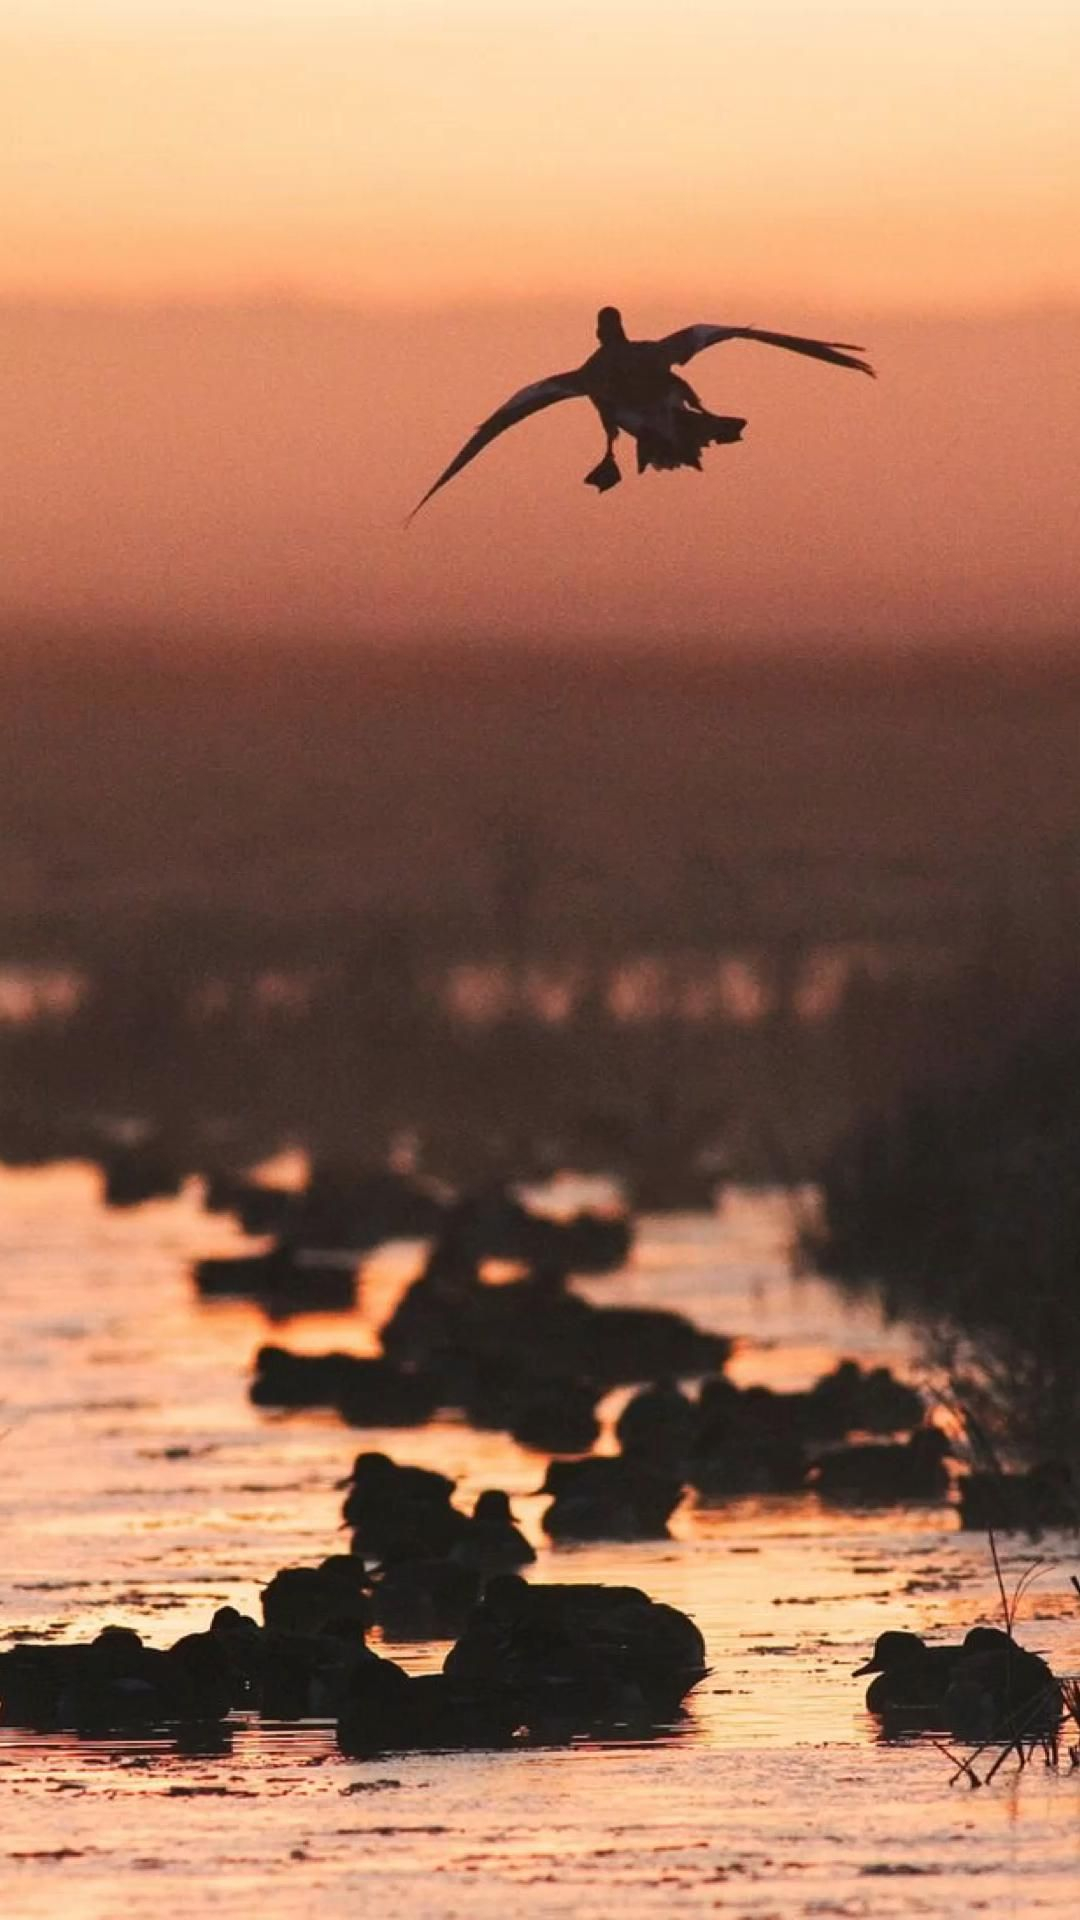 1080x1920 Backgrounds | Waterfowl hunting, Duck hunting, Hunting wallpaper